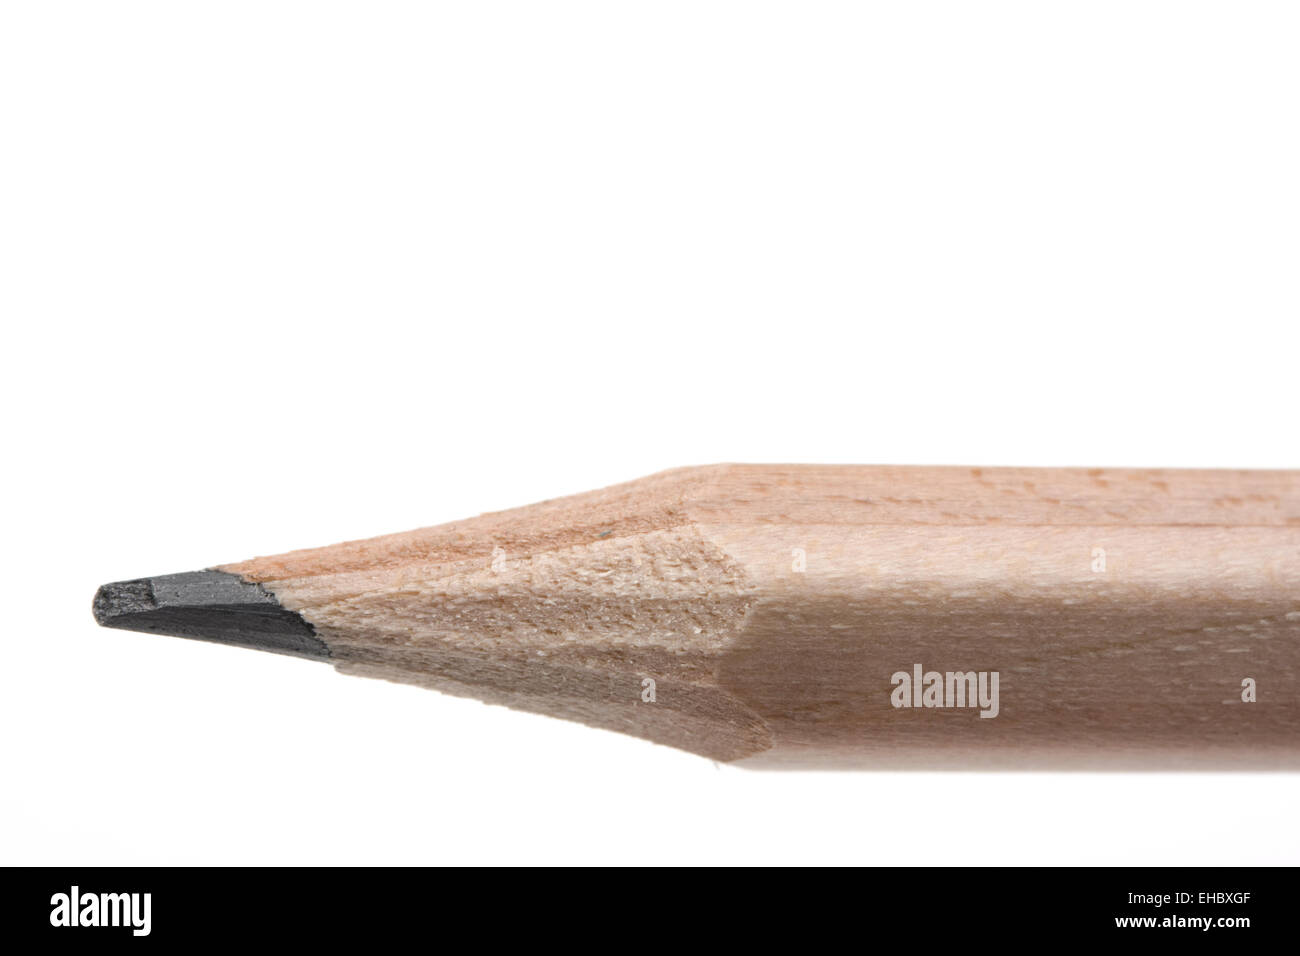 detail of a sharp pencil Stock Photo